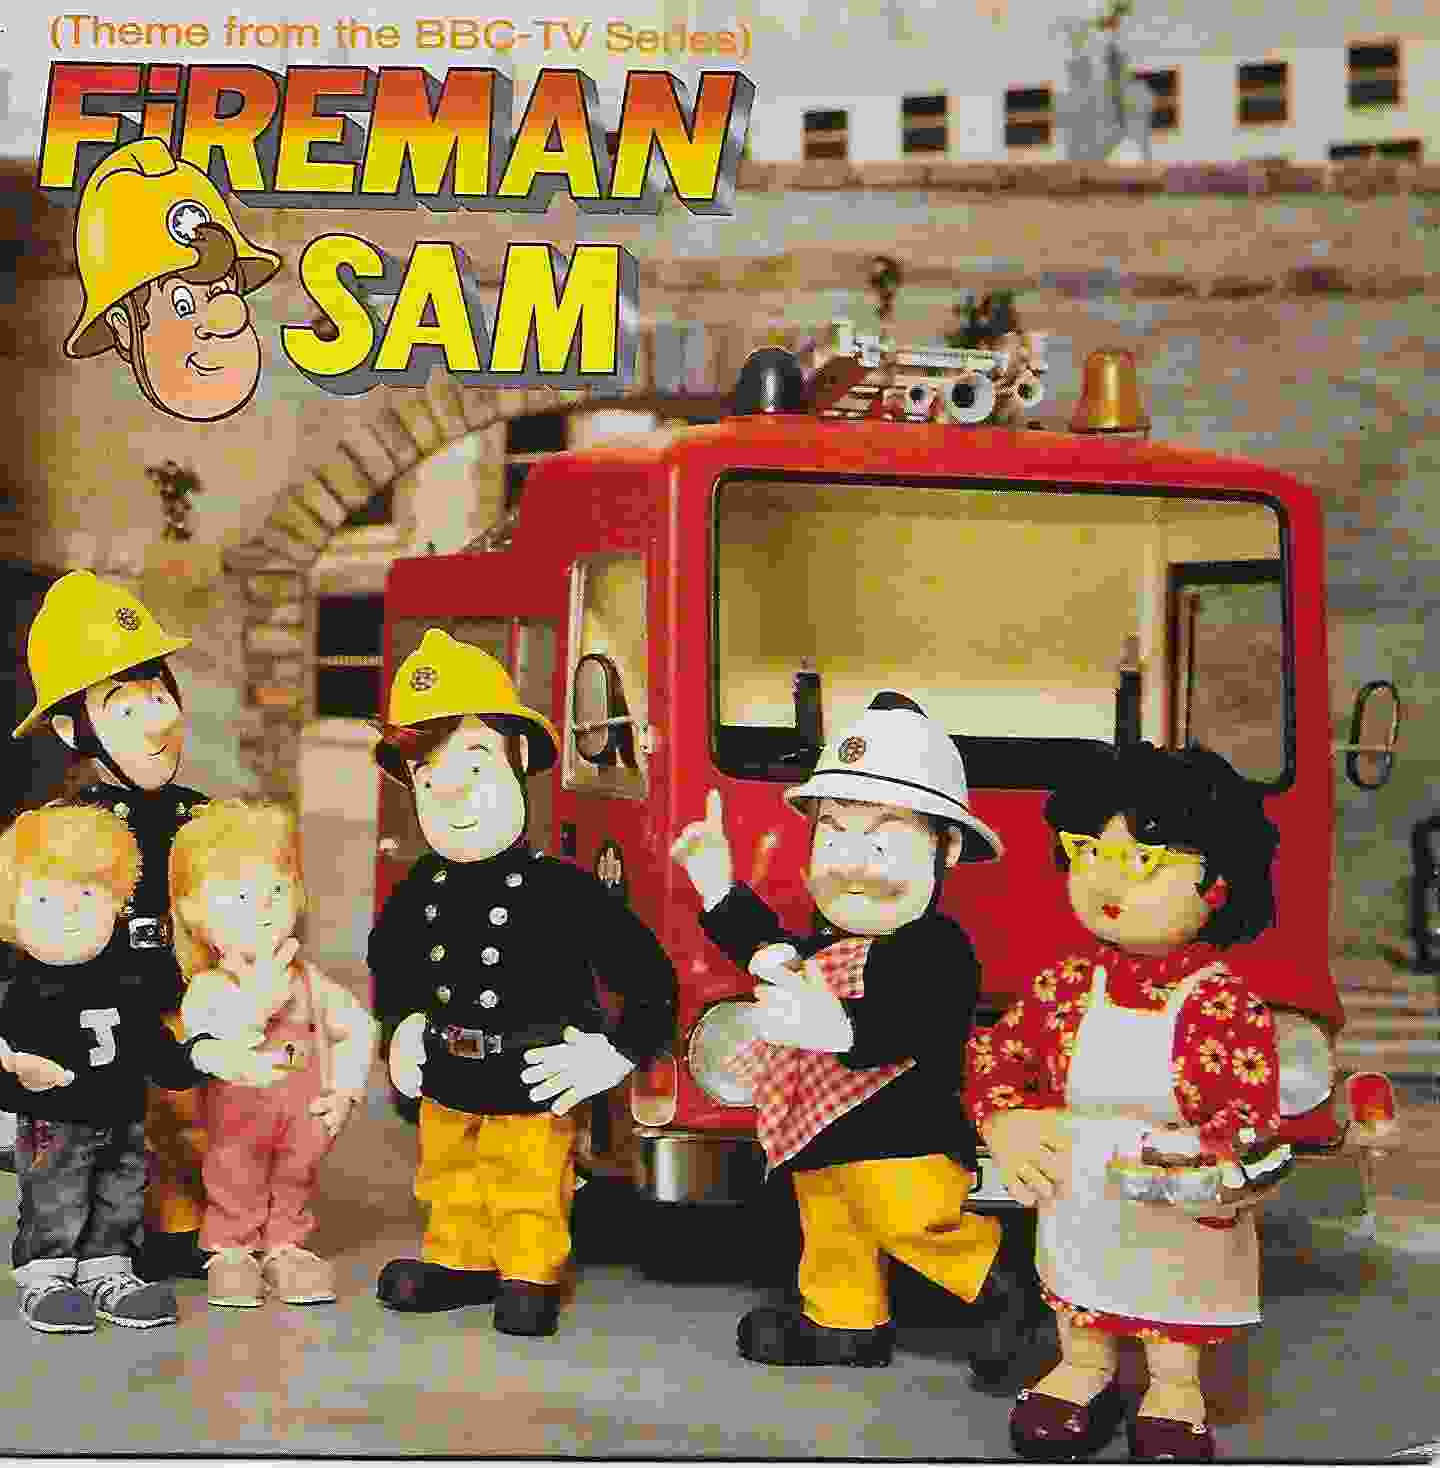 Picture of Fireman Sam by artist Maldwyn Pope from the BBC singles - Records and Tapes library